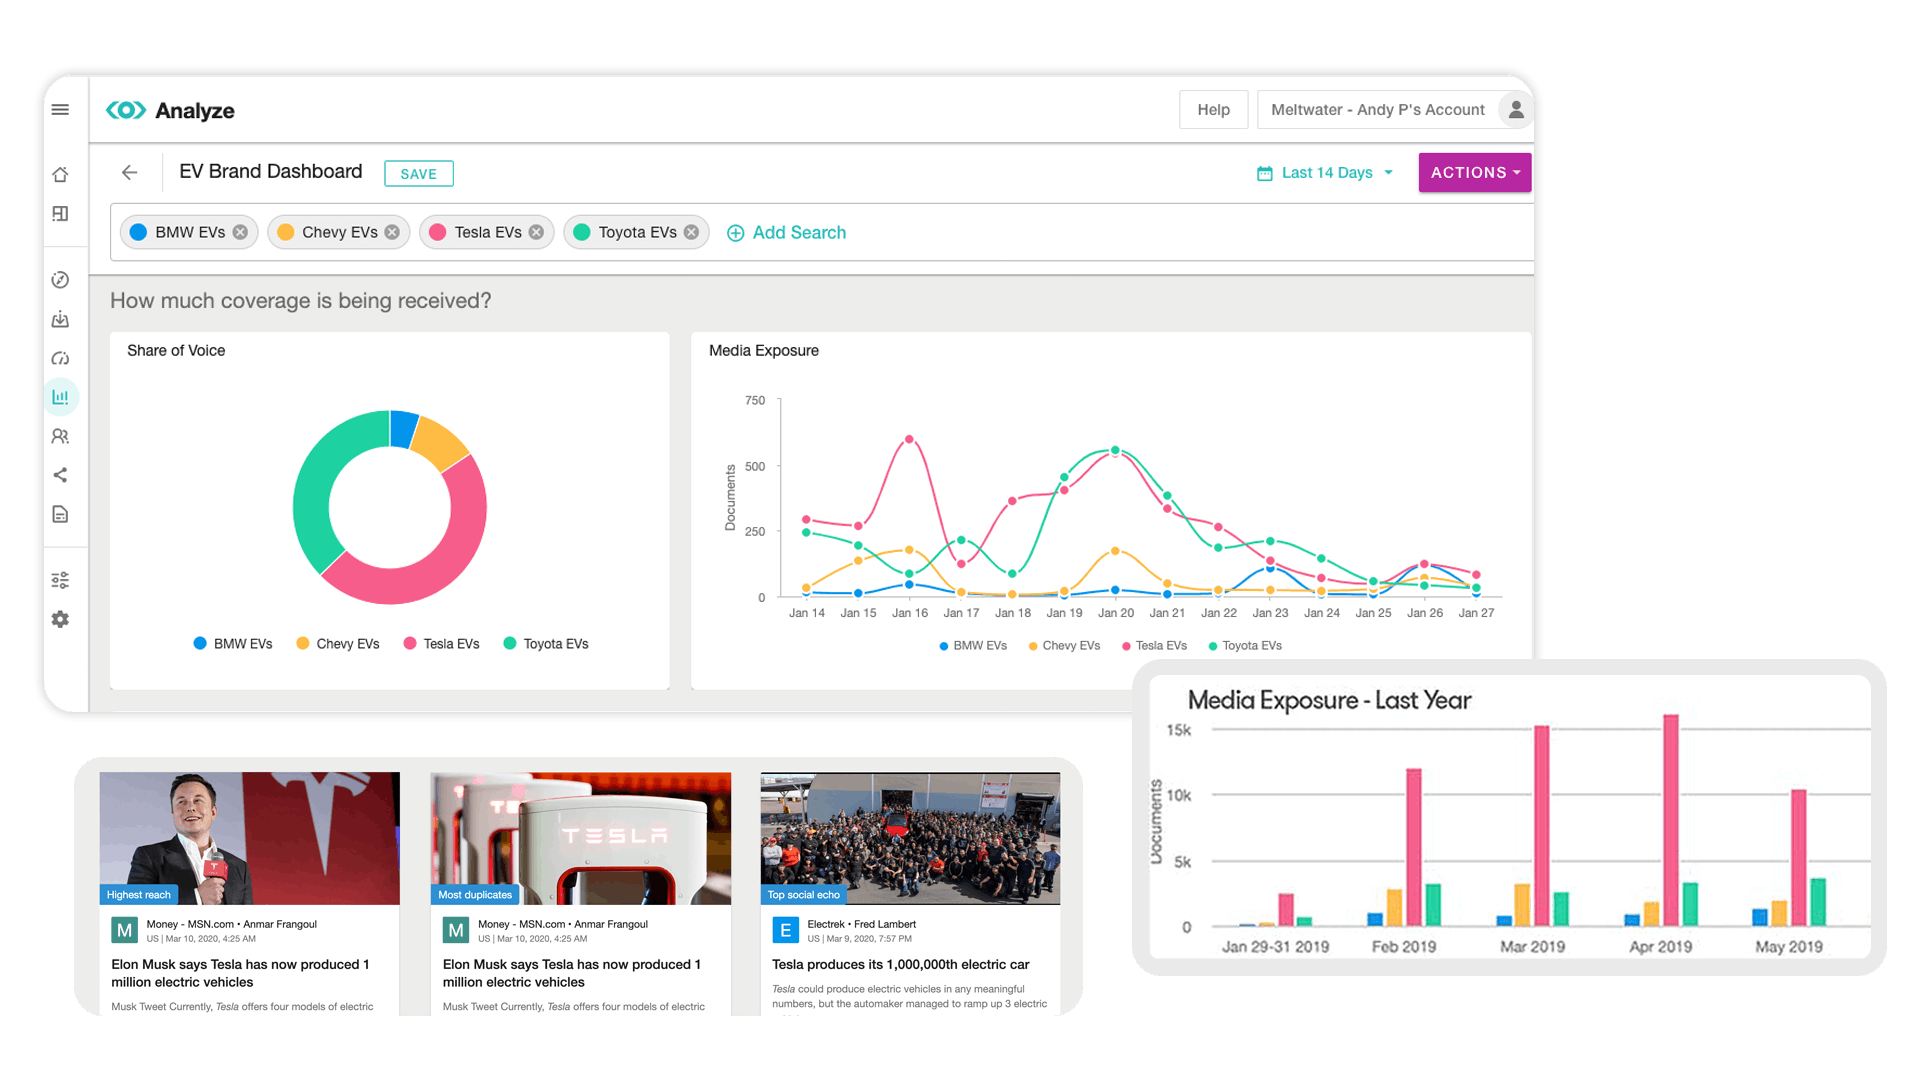 Meltwater dashboard showing analysis data with images of graphs and stories.